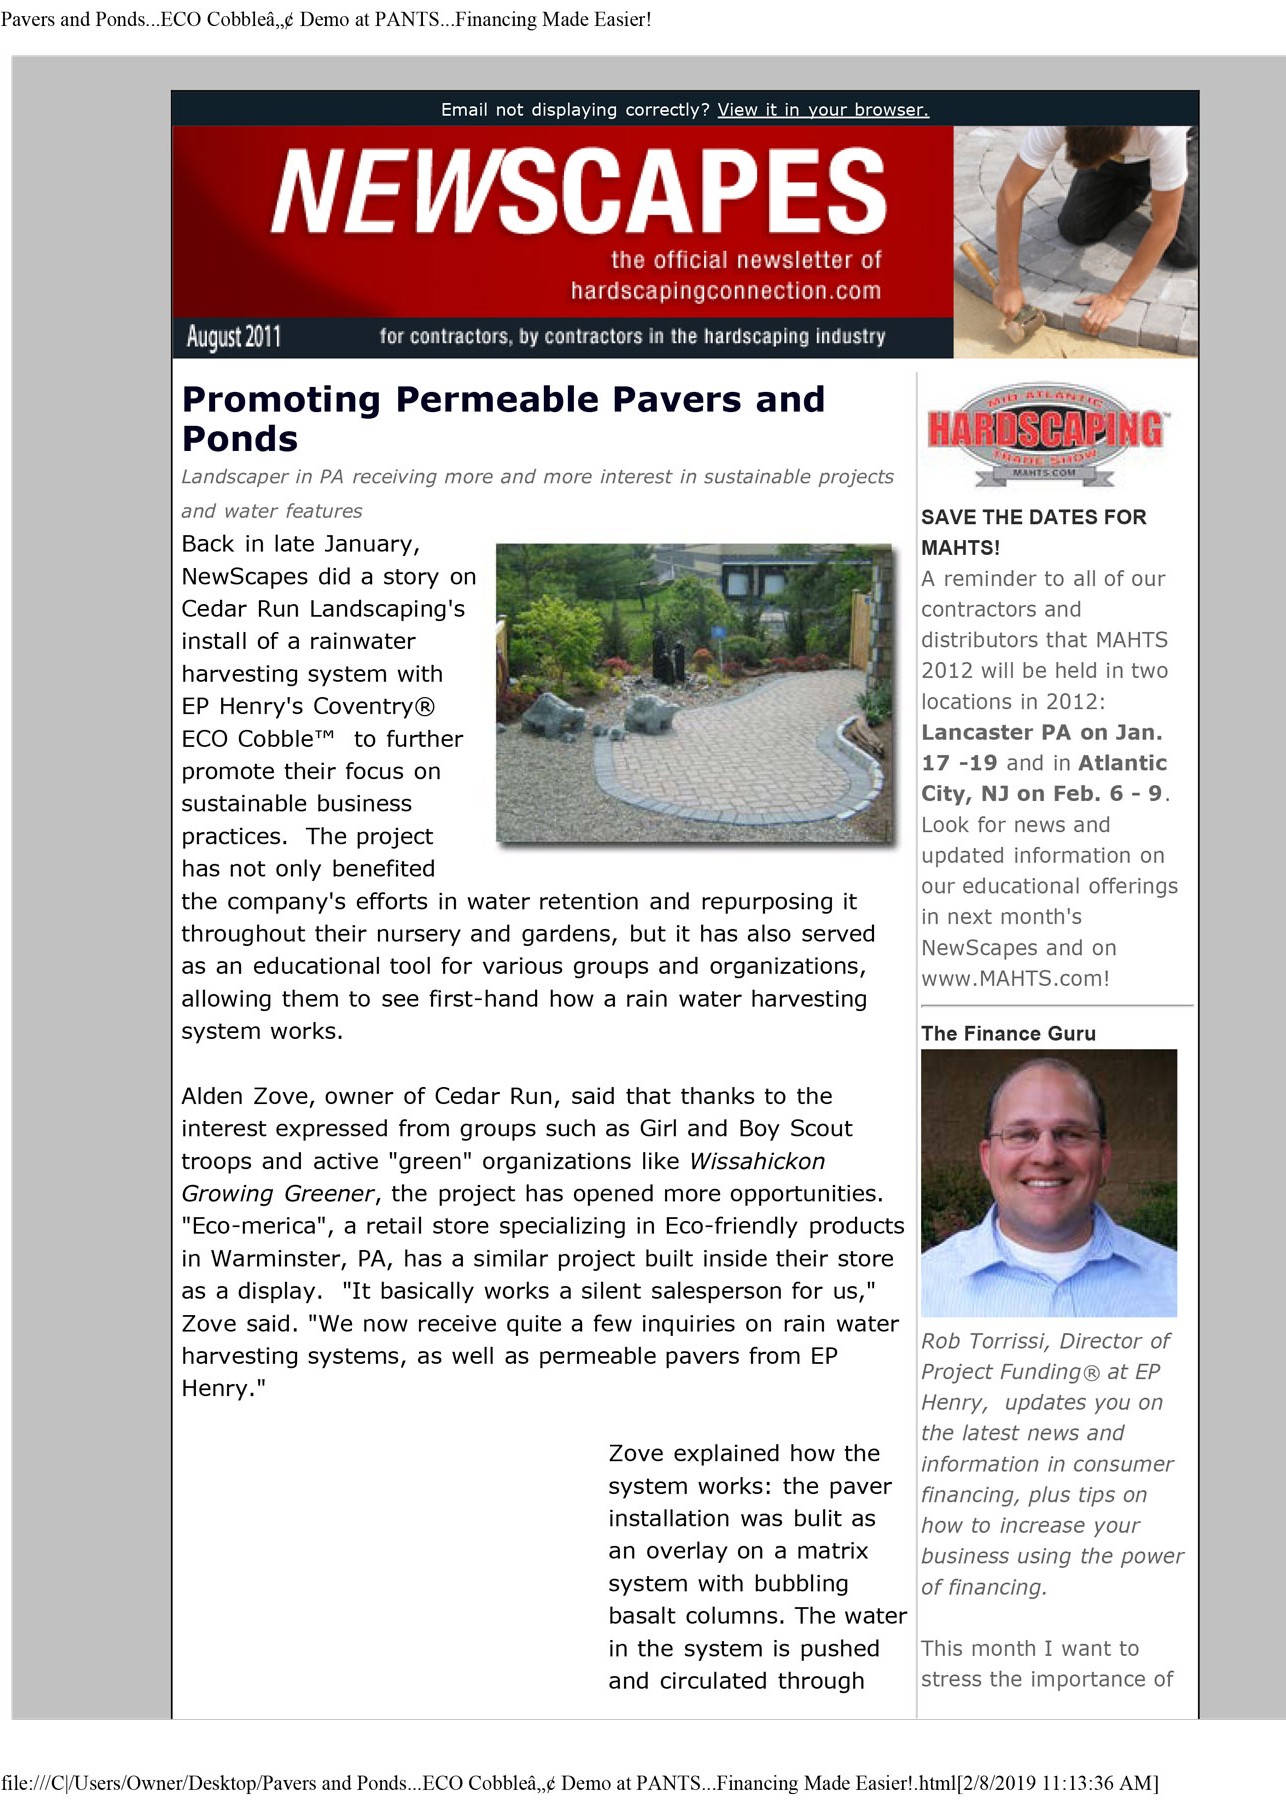 Promoting Permeable Pavers and Ponds Article